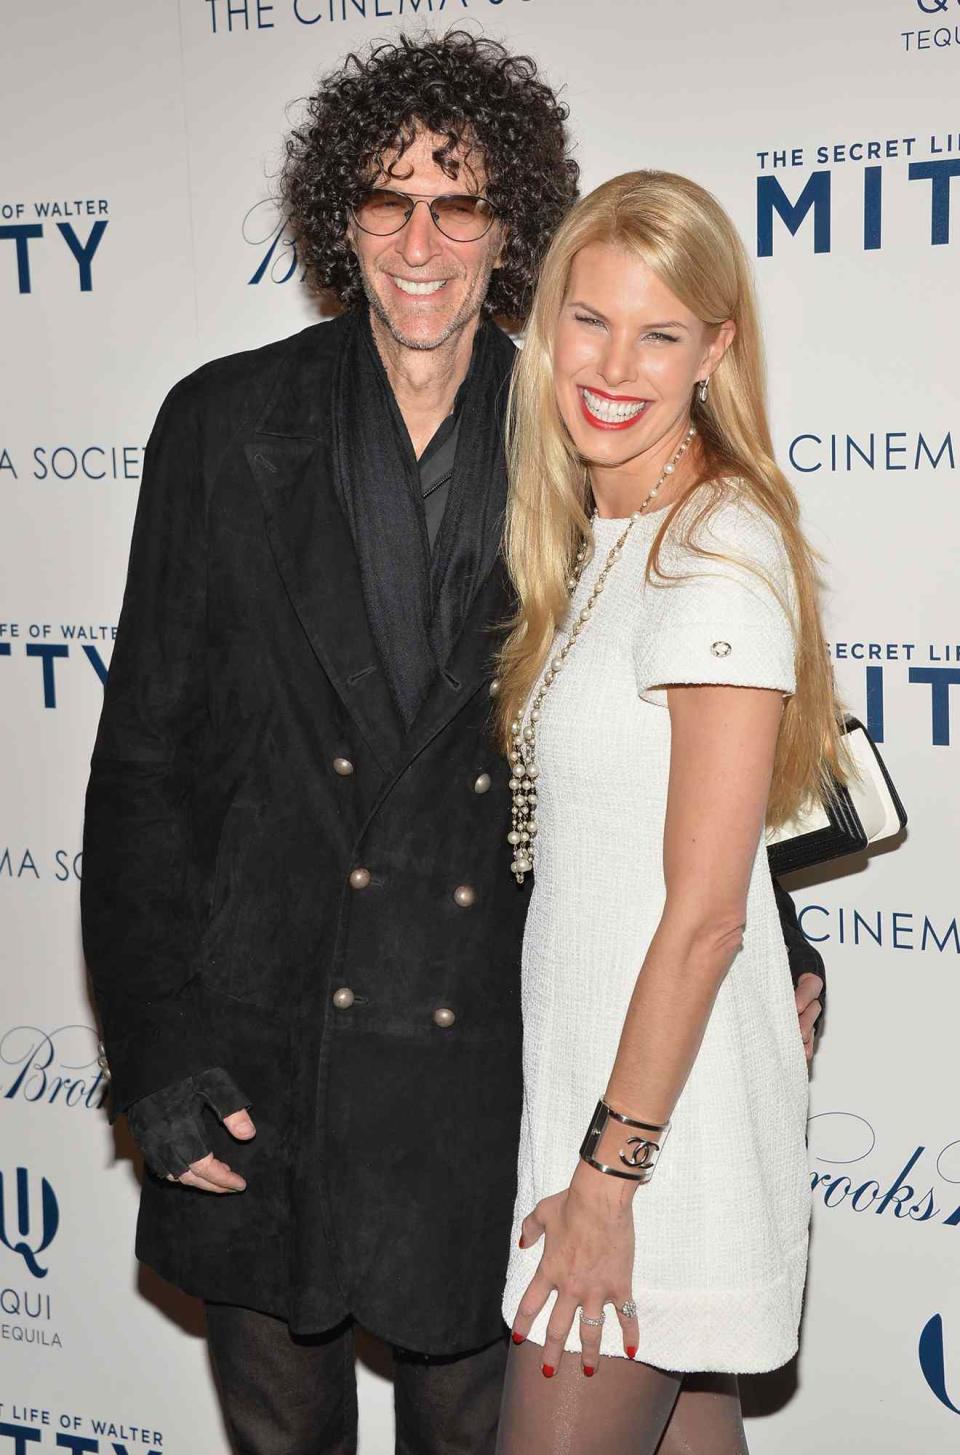 Howard Stern and Beth Ostrosky Stern attend the 20th Century Fox with The Cinema Society & Brooks Brothers screening of "The Secret Life Of Walter Mitty" at Museum of Modern Art on December 18, 2013 in New York City